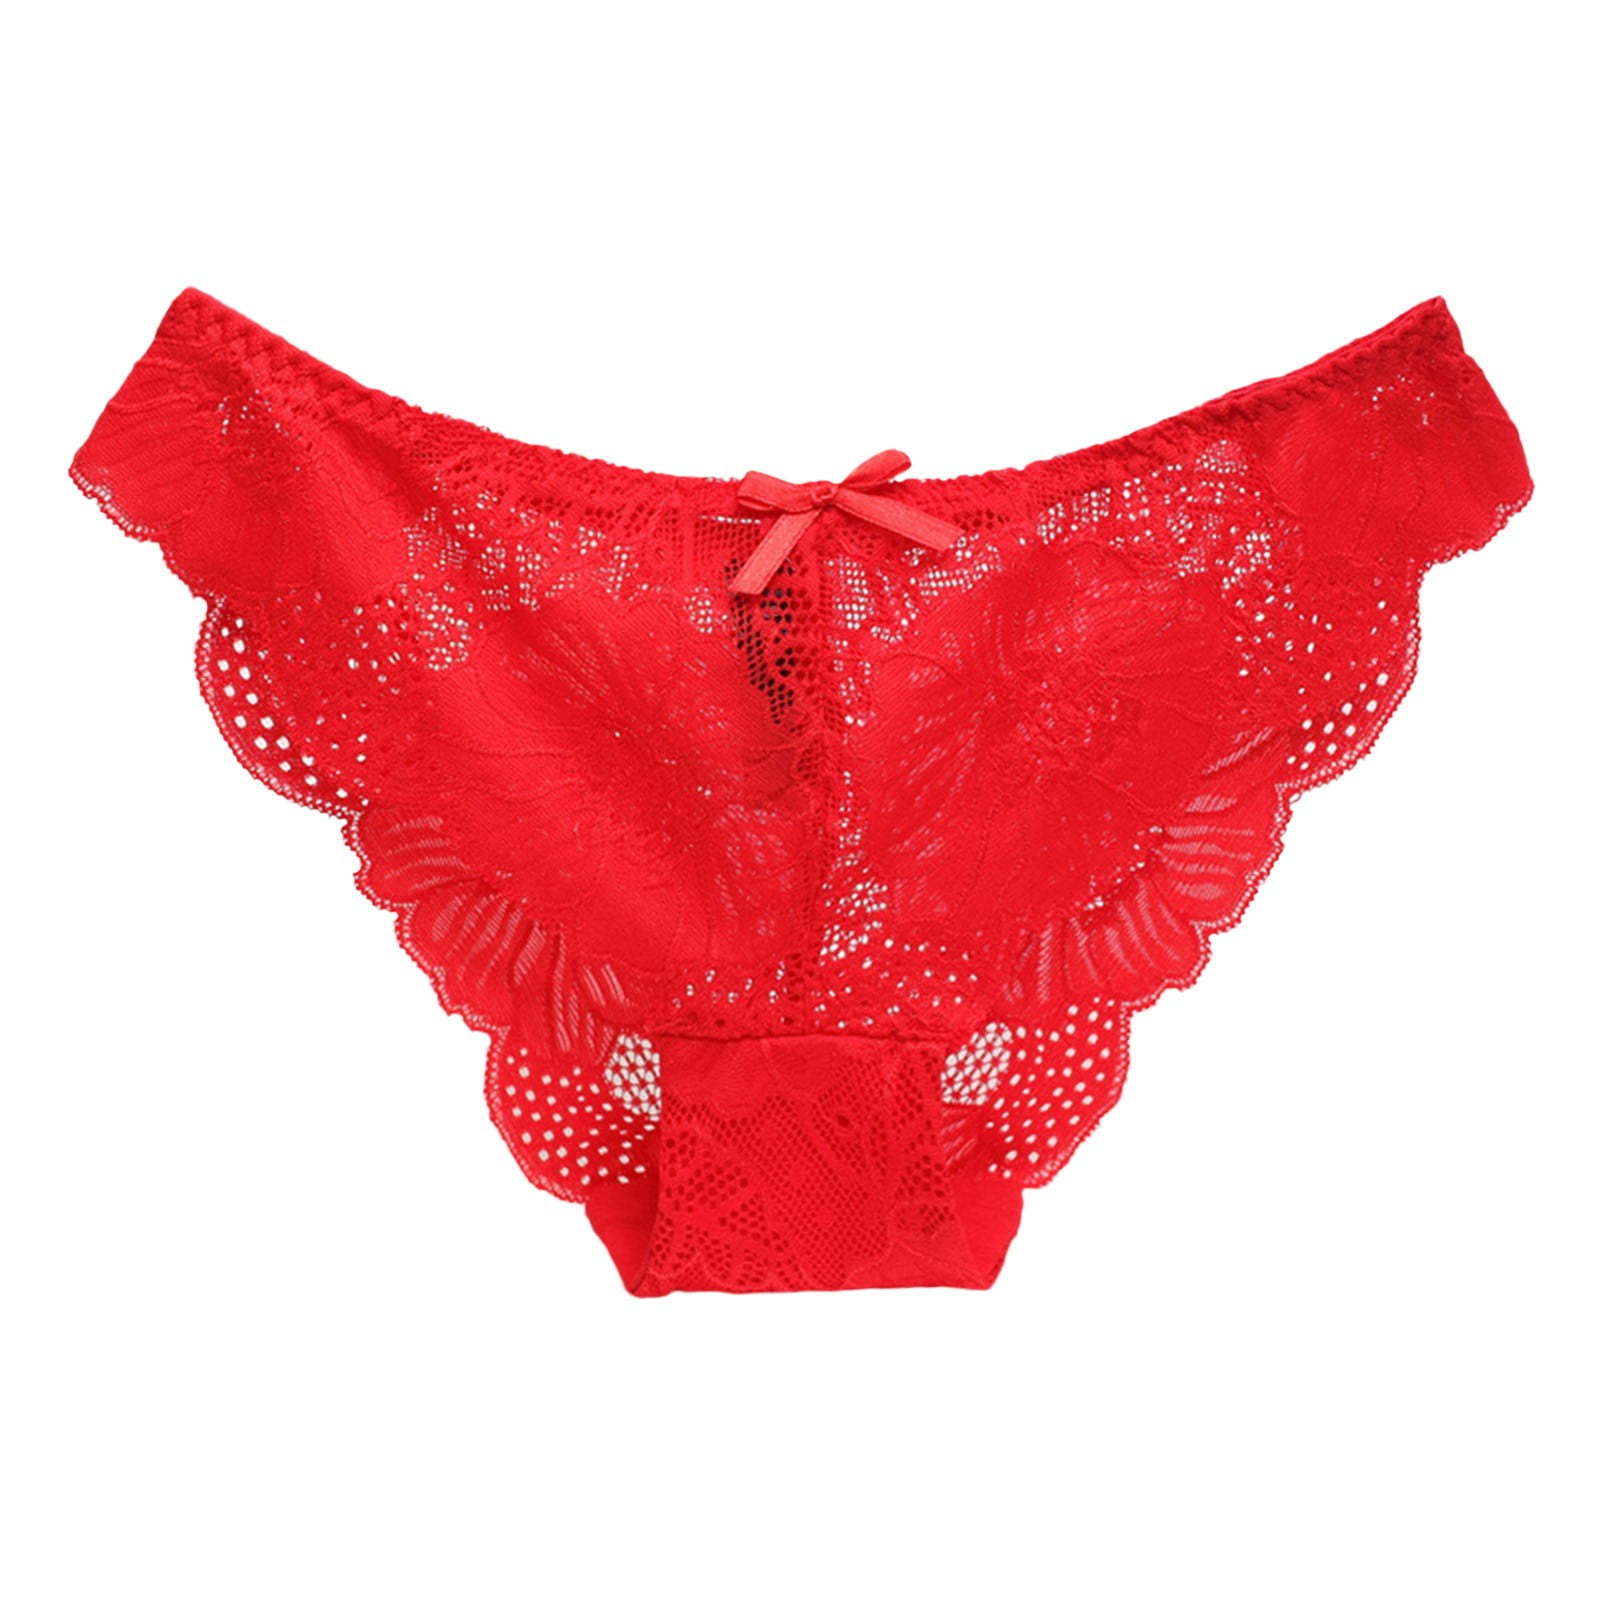 Papatya DR.BUGGY 8811 WOMEN'S CHRISTMAS NEW YEAR BACK PRINTED RED PANTIES  (38-40) STANDARD SIZE - Trendyol